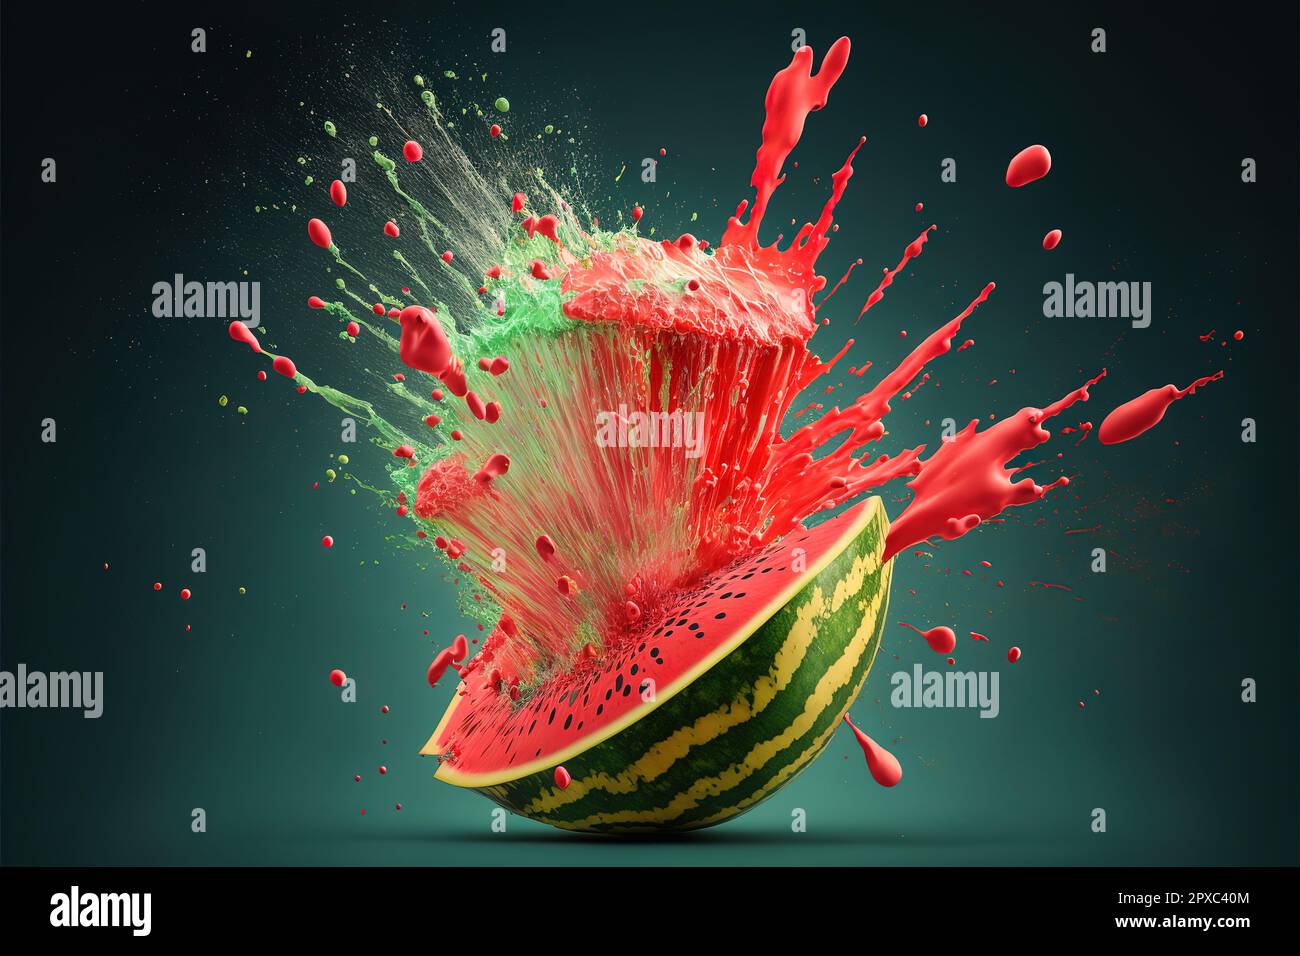 Fresh watermelon exploding with juice. Stock Photo